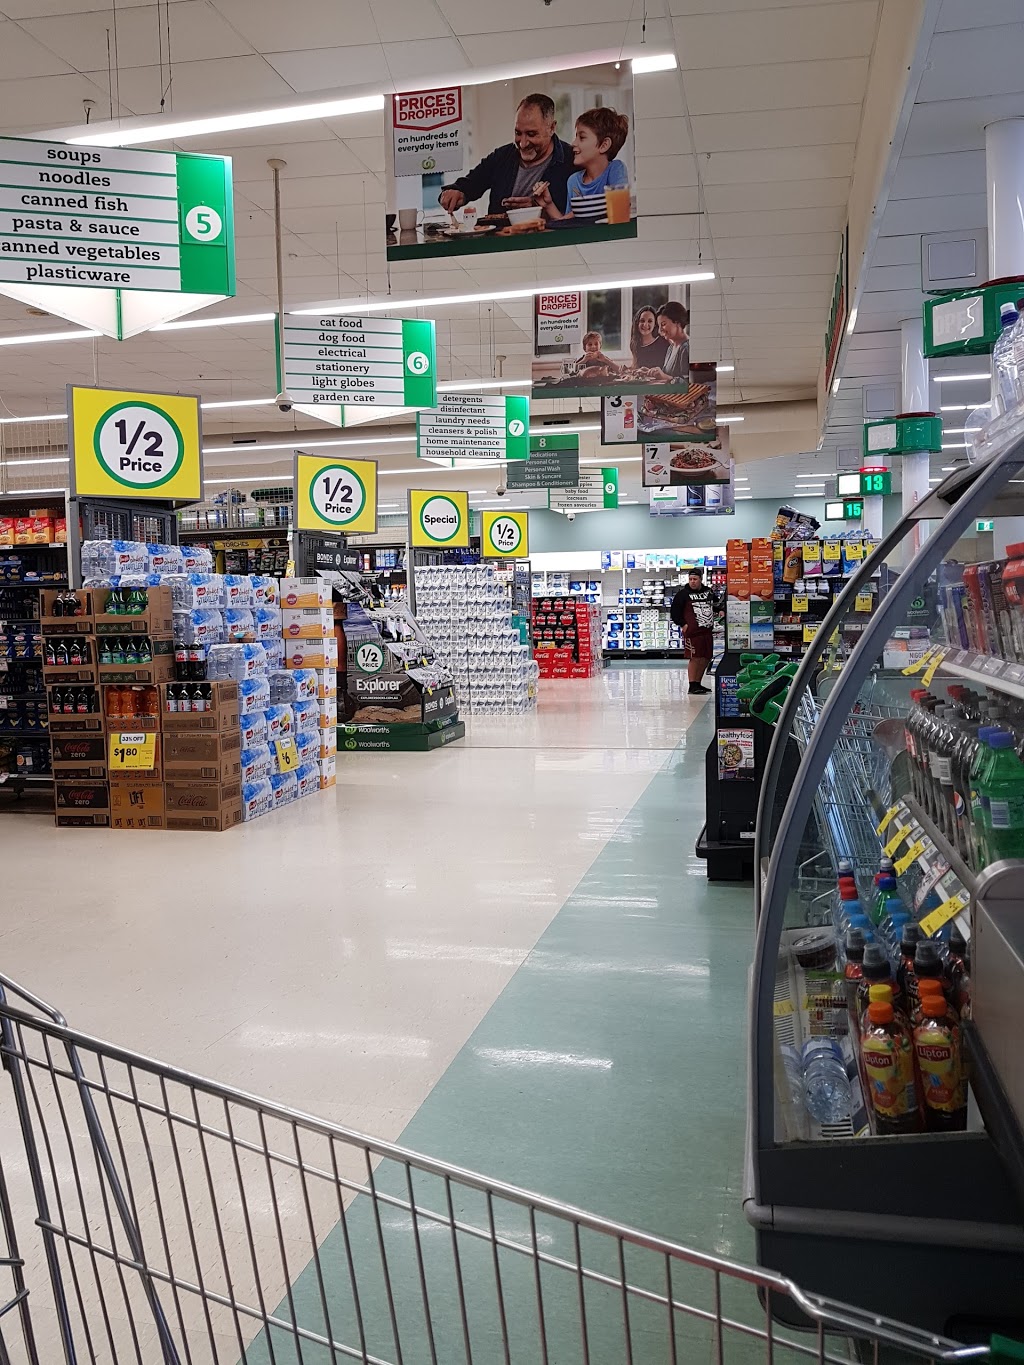 Woolworths Albion Park | supermarket | Russell St, Albion Park NSW 2527, Australia | 0242326403 OR +61 2 4232 6403